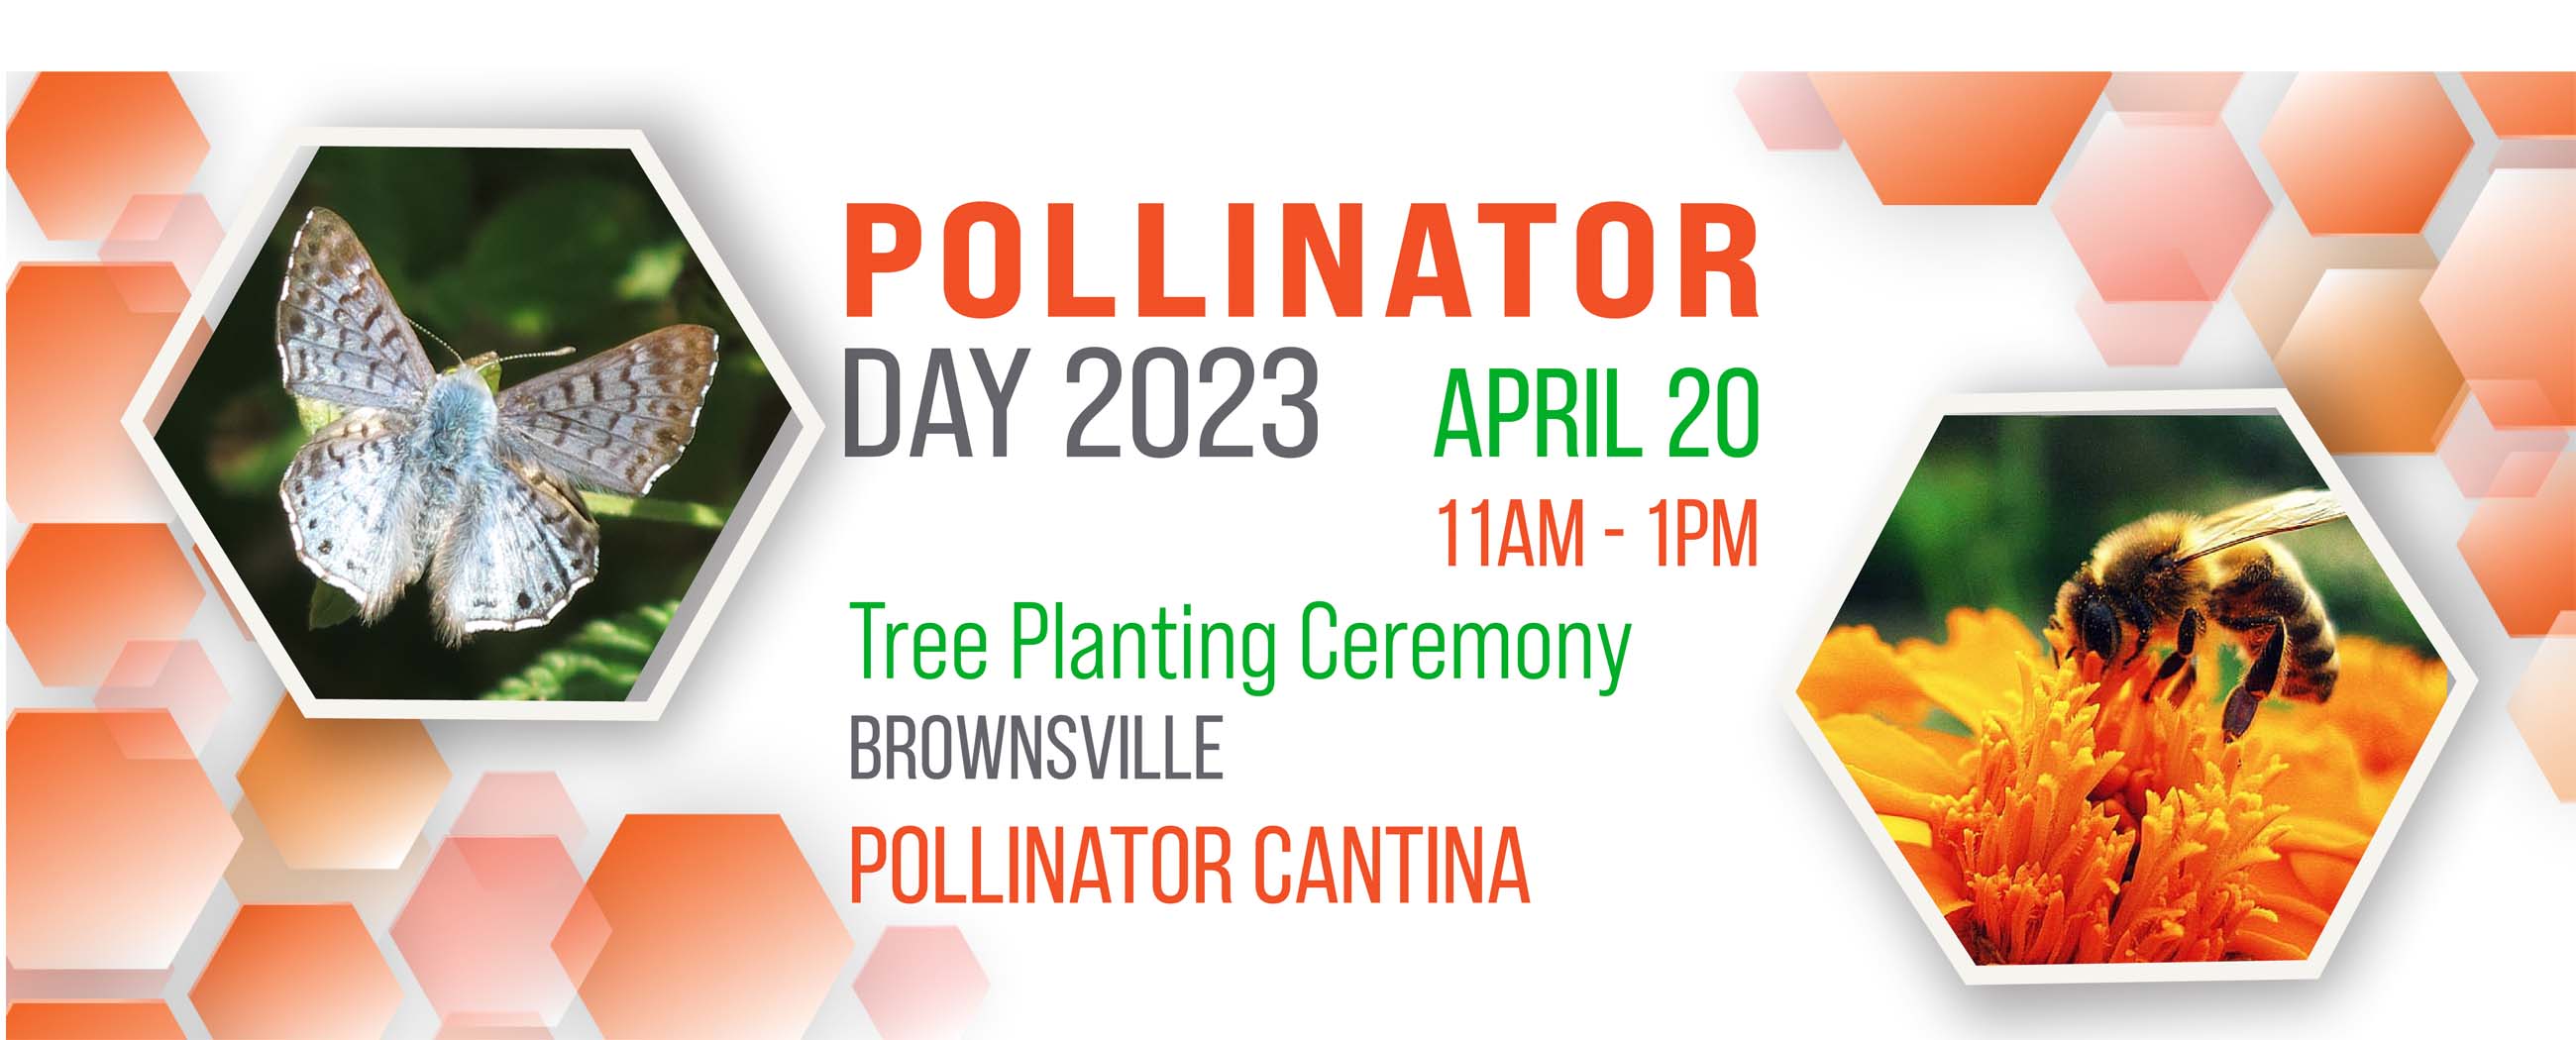 Pollinator Day 2023. April 20 from 11AM - 1PM. Tree Planting Ceremony at Brownsville at Pollinator Cantina. Page Banner 